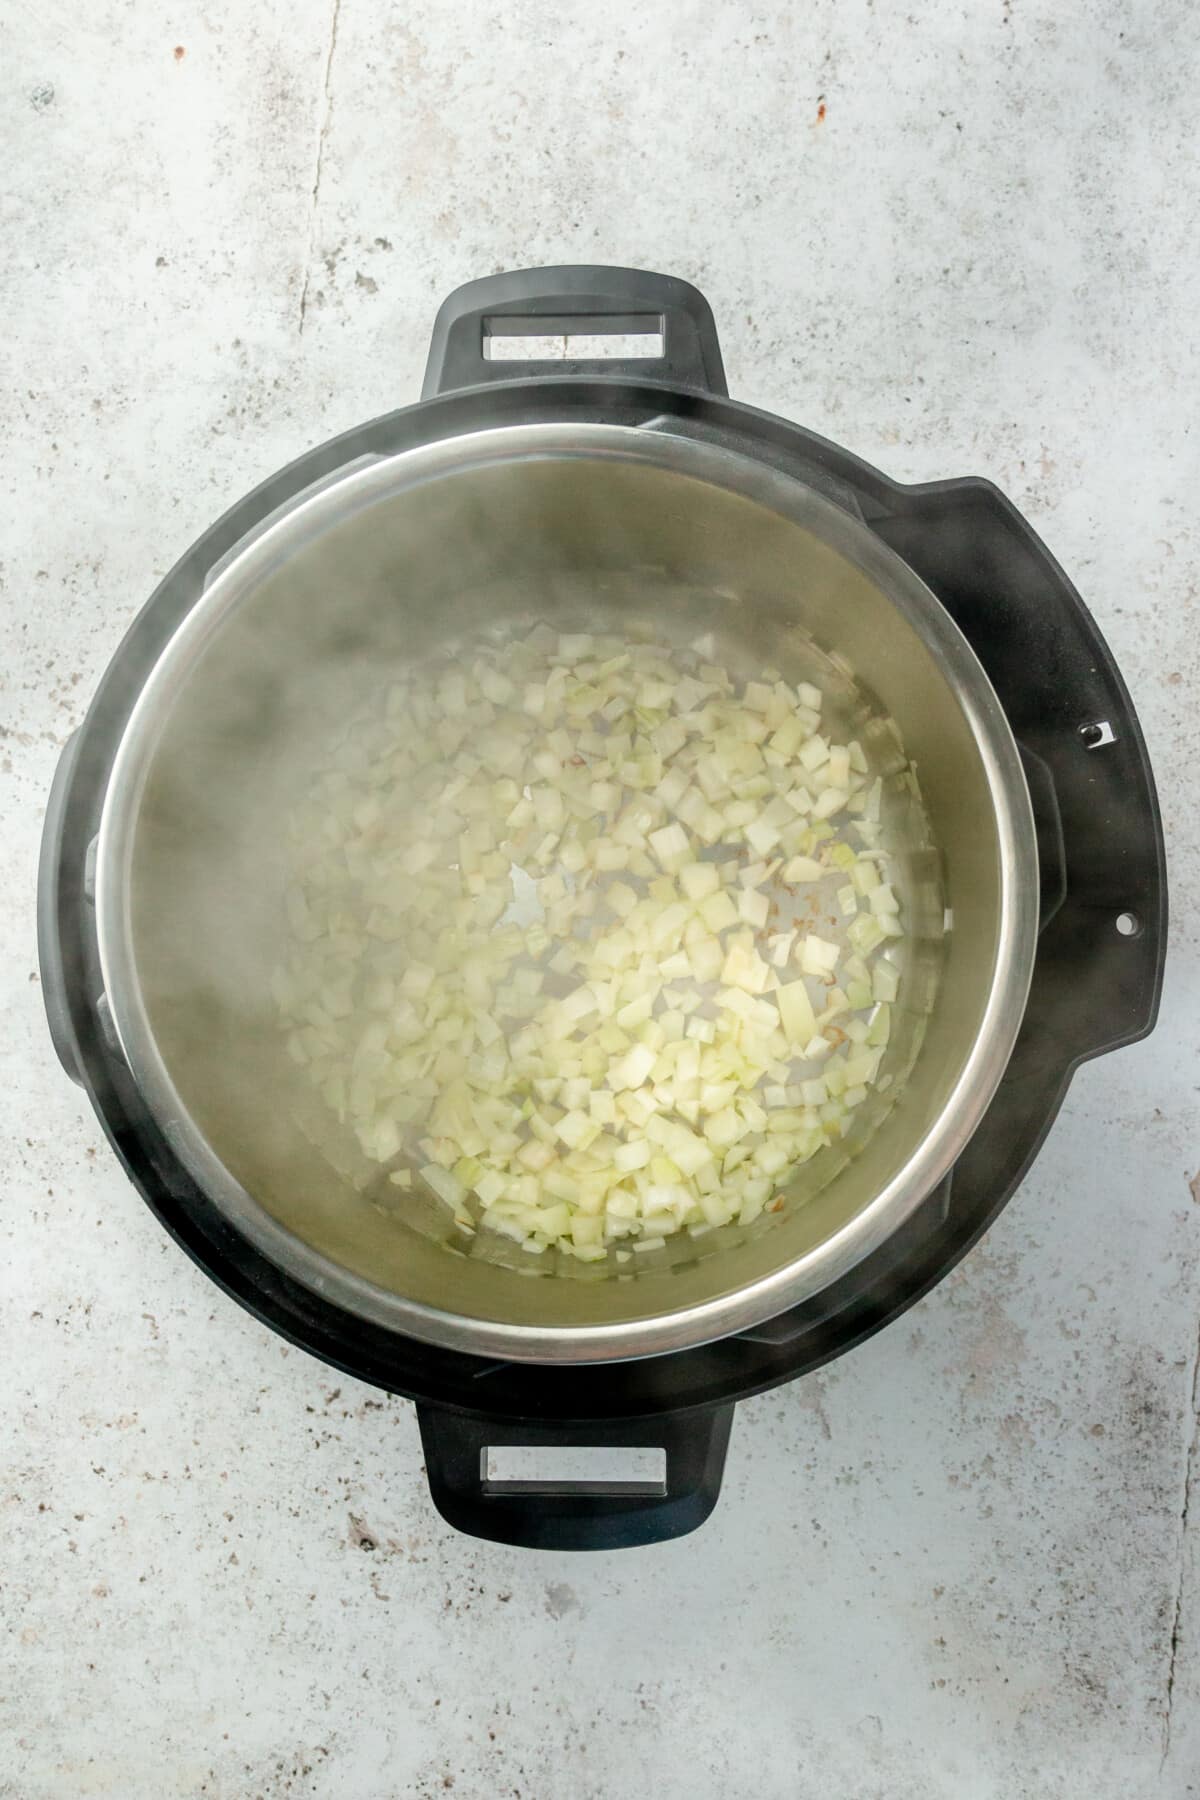 Steam is visible from a hot instant pot with diced onion cooked sitting atop on a light grey colored surface.